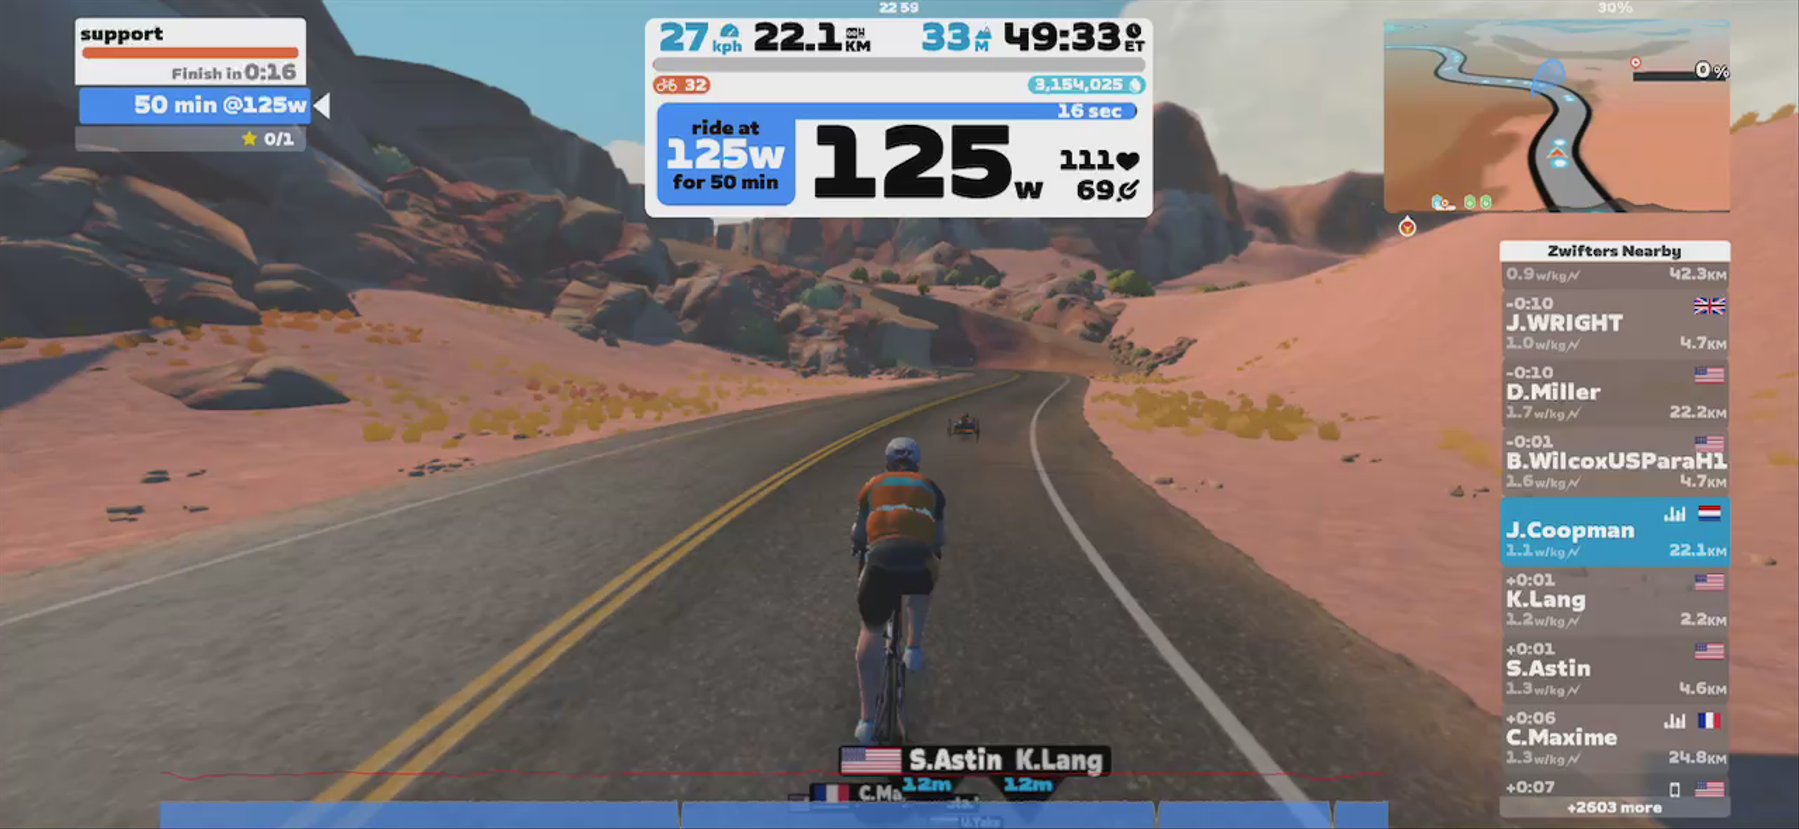 Zwift - support in Watopia